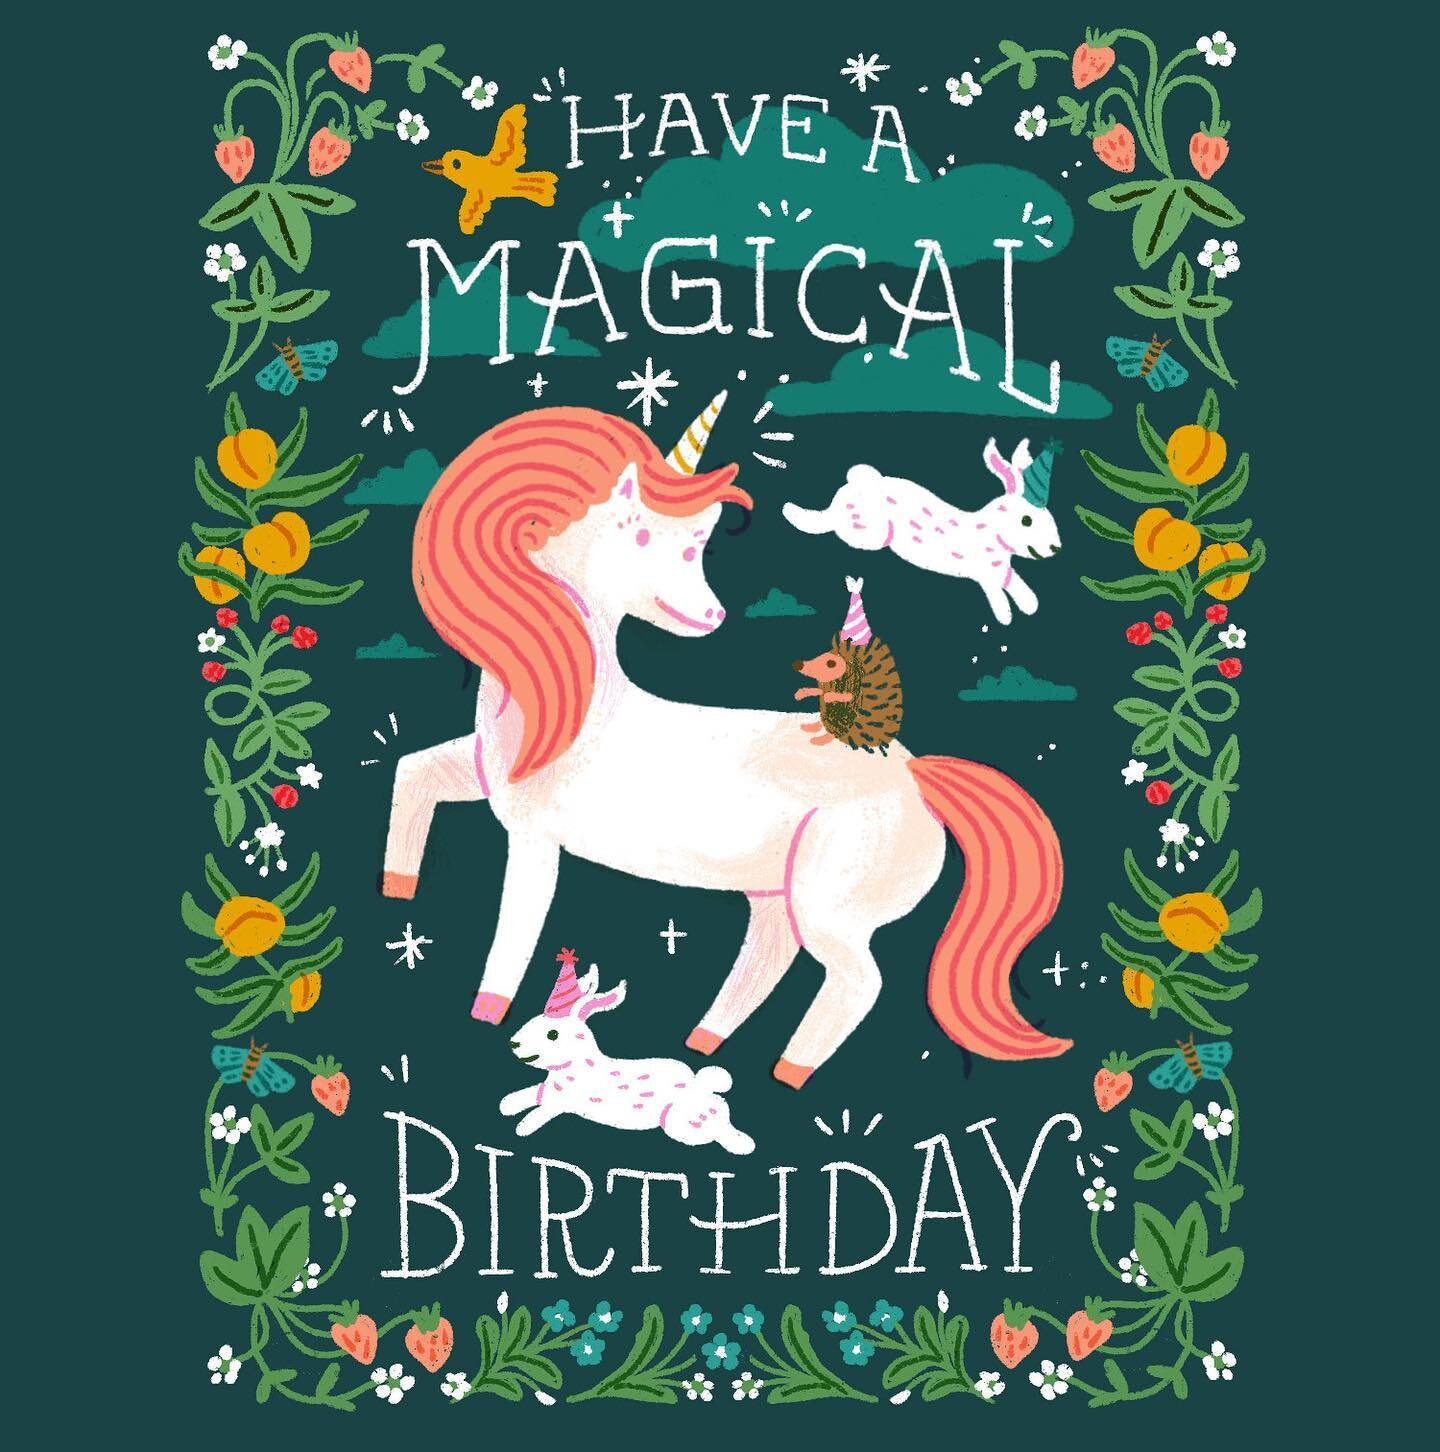 I asked my daughter Ros what kind of birthday card I should make next and of course she said unicorn, so this one&rsquo;s for her. This card is loosely inspired by &ldquo;The Unicorn Tapestries&rdquo; of the @metmuseum and some day I hope she can see